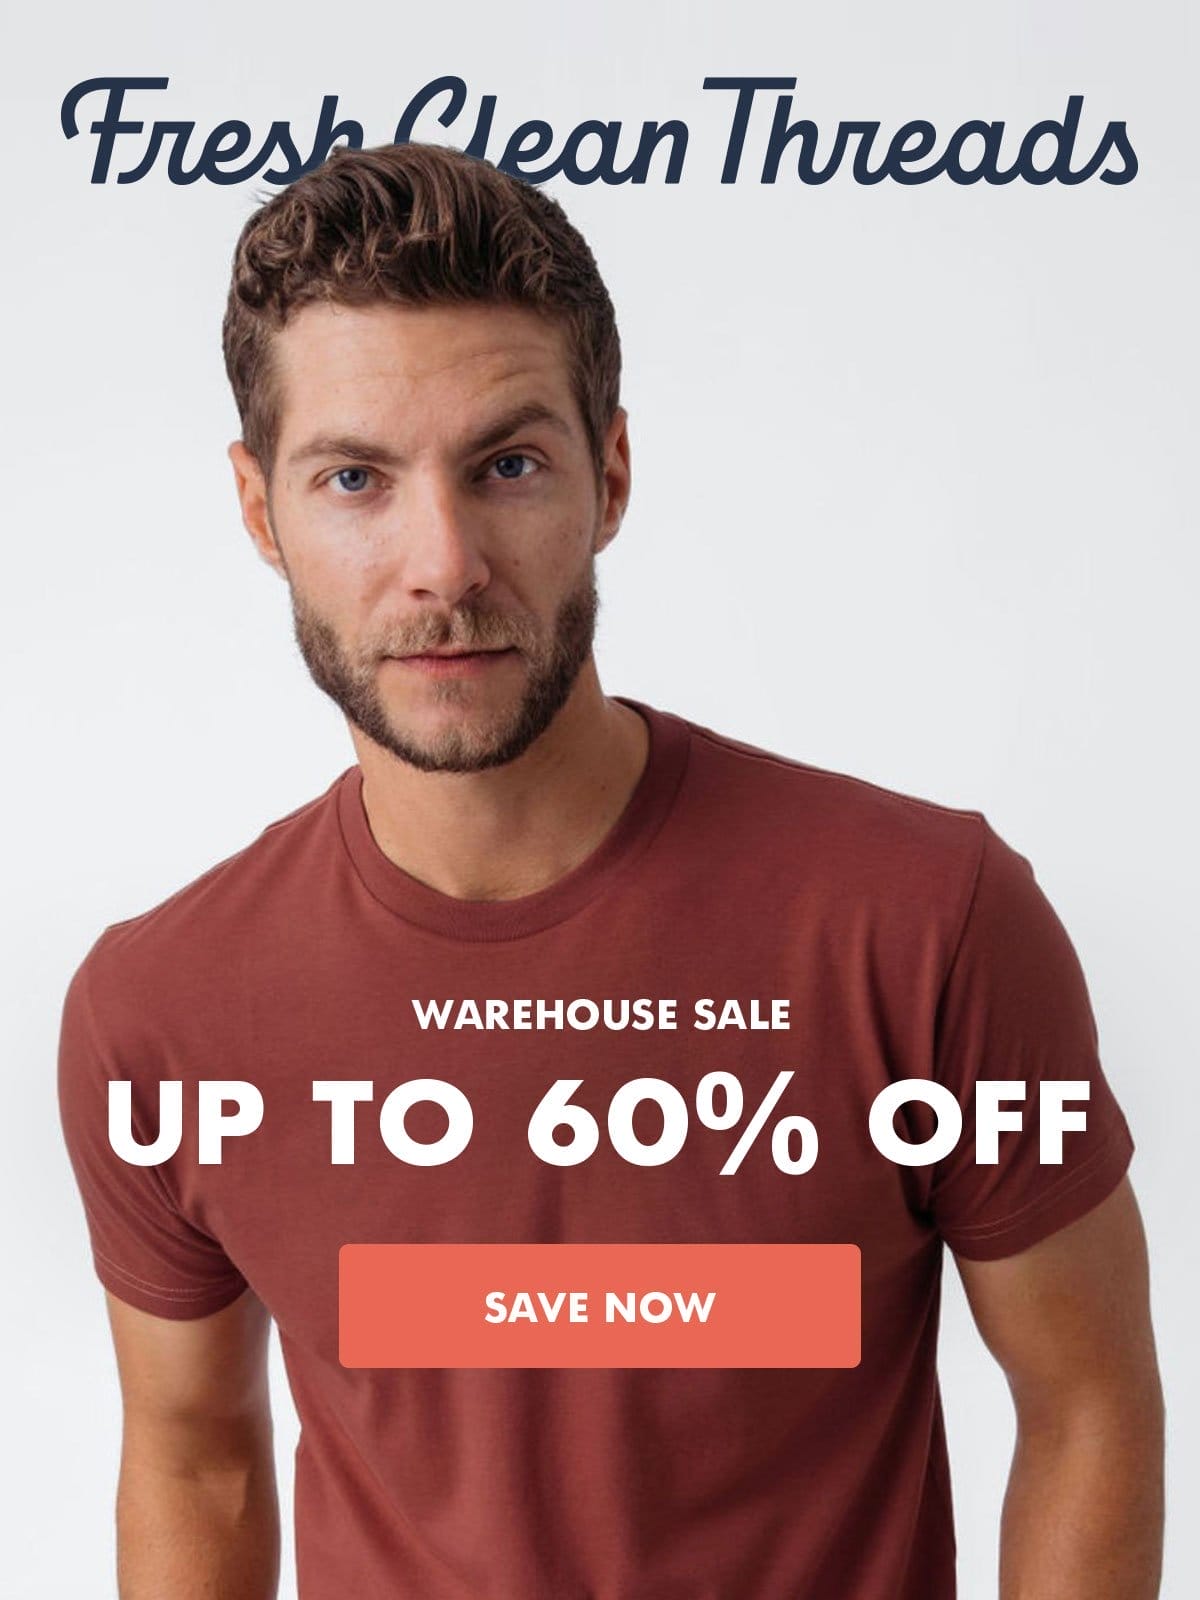 Warehouse sale up to 60% off